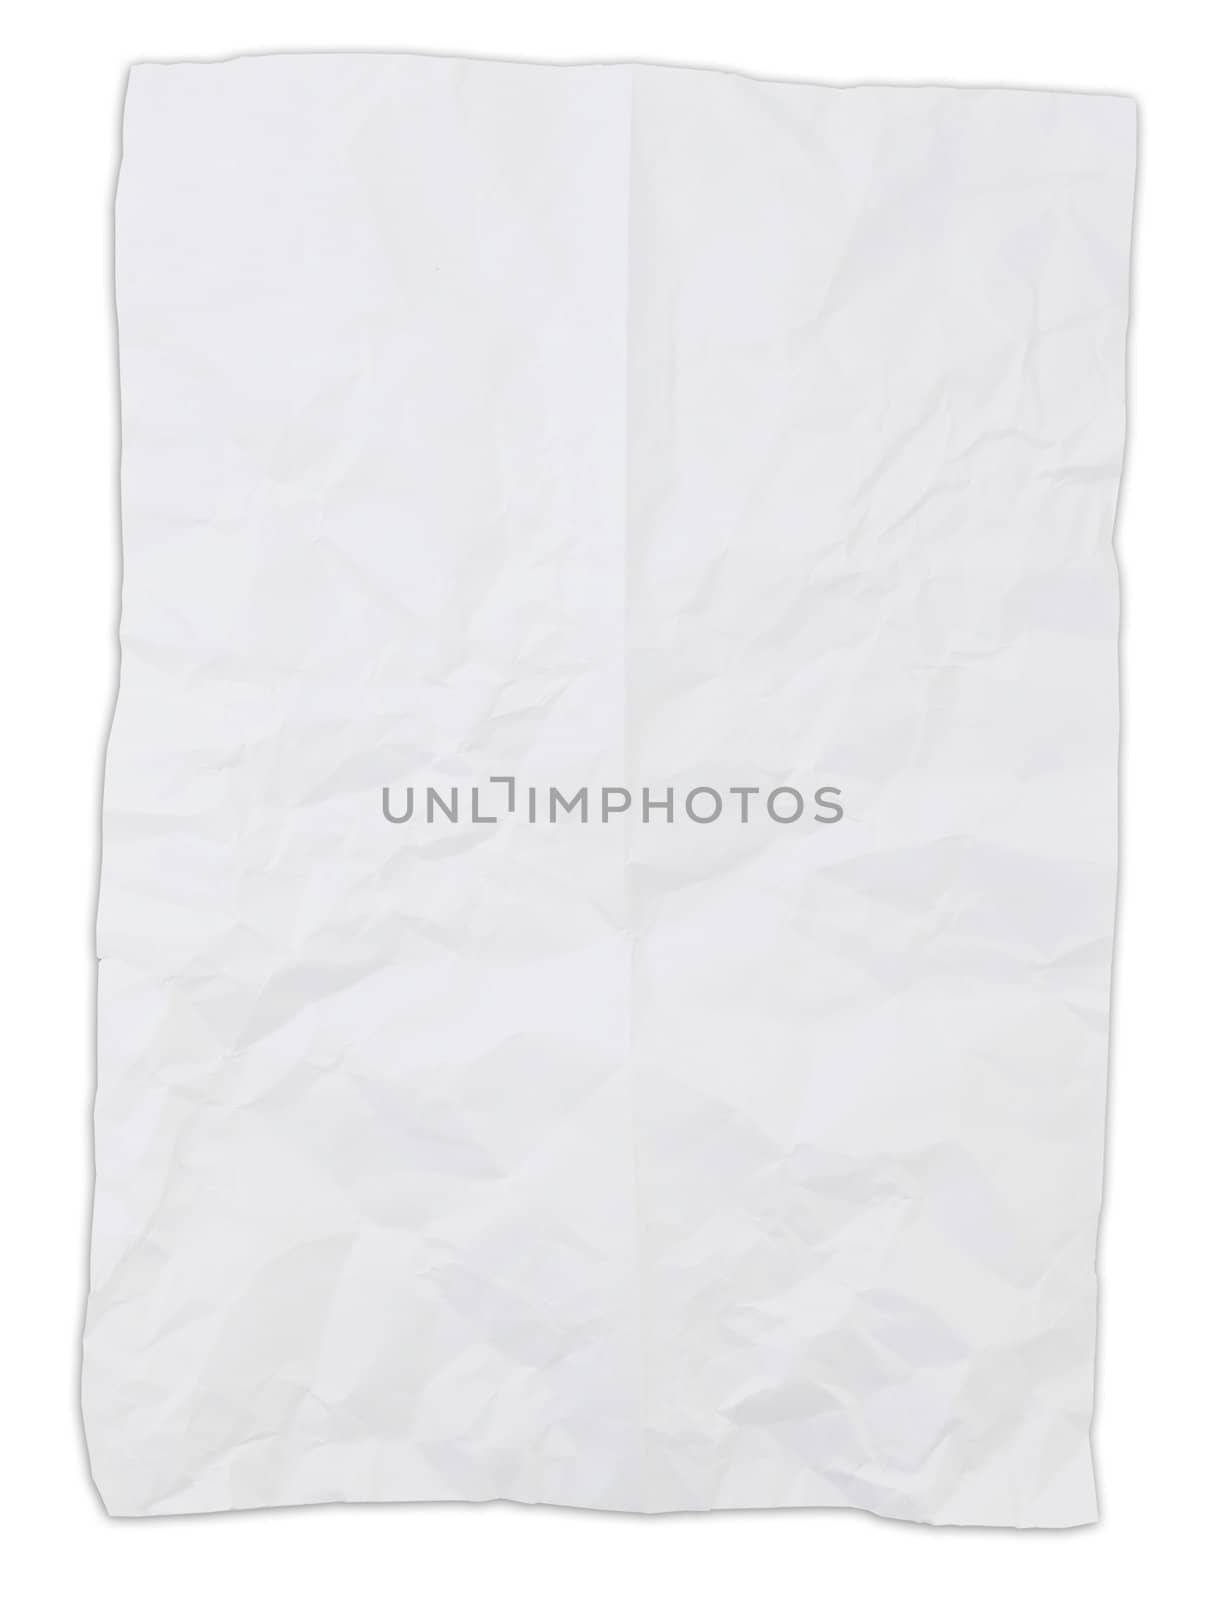 White crumpled paper on white background isolated